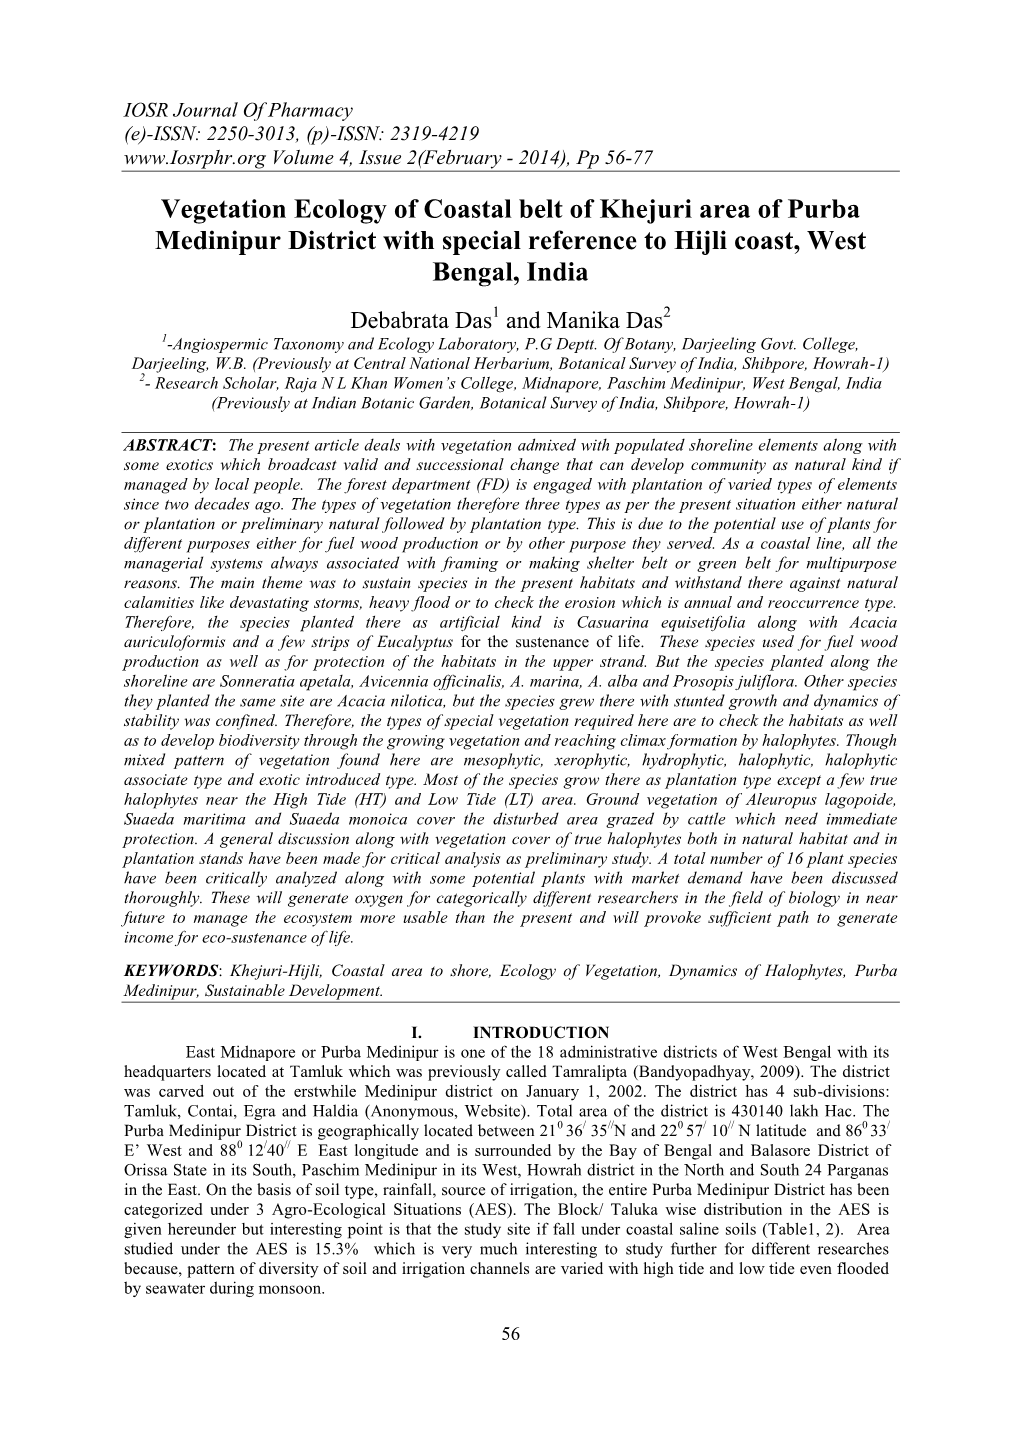 Vegetation Ecology of Coastal Belt of Khejuri Area of Purba Medinipur District with Special Reference to Hijli Coast, West Bengal, India